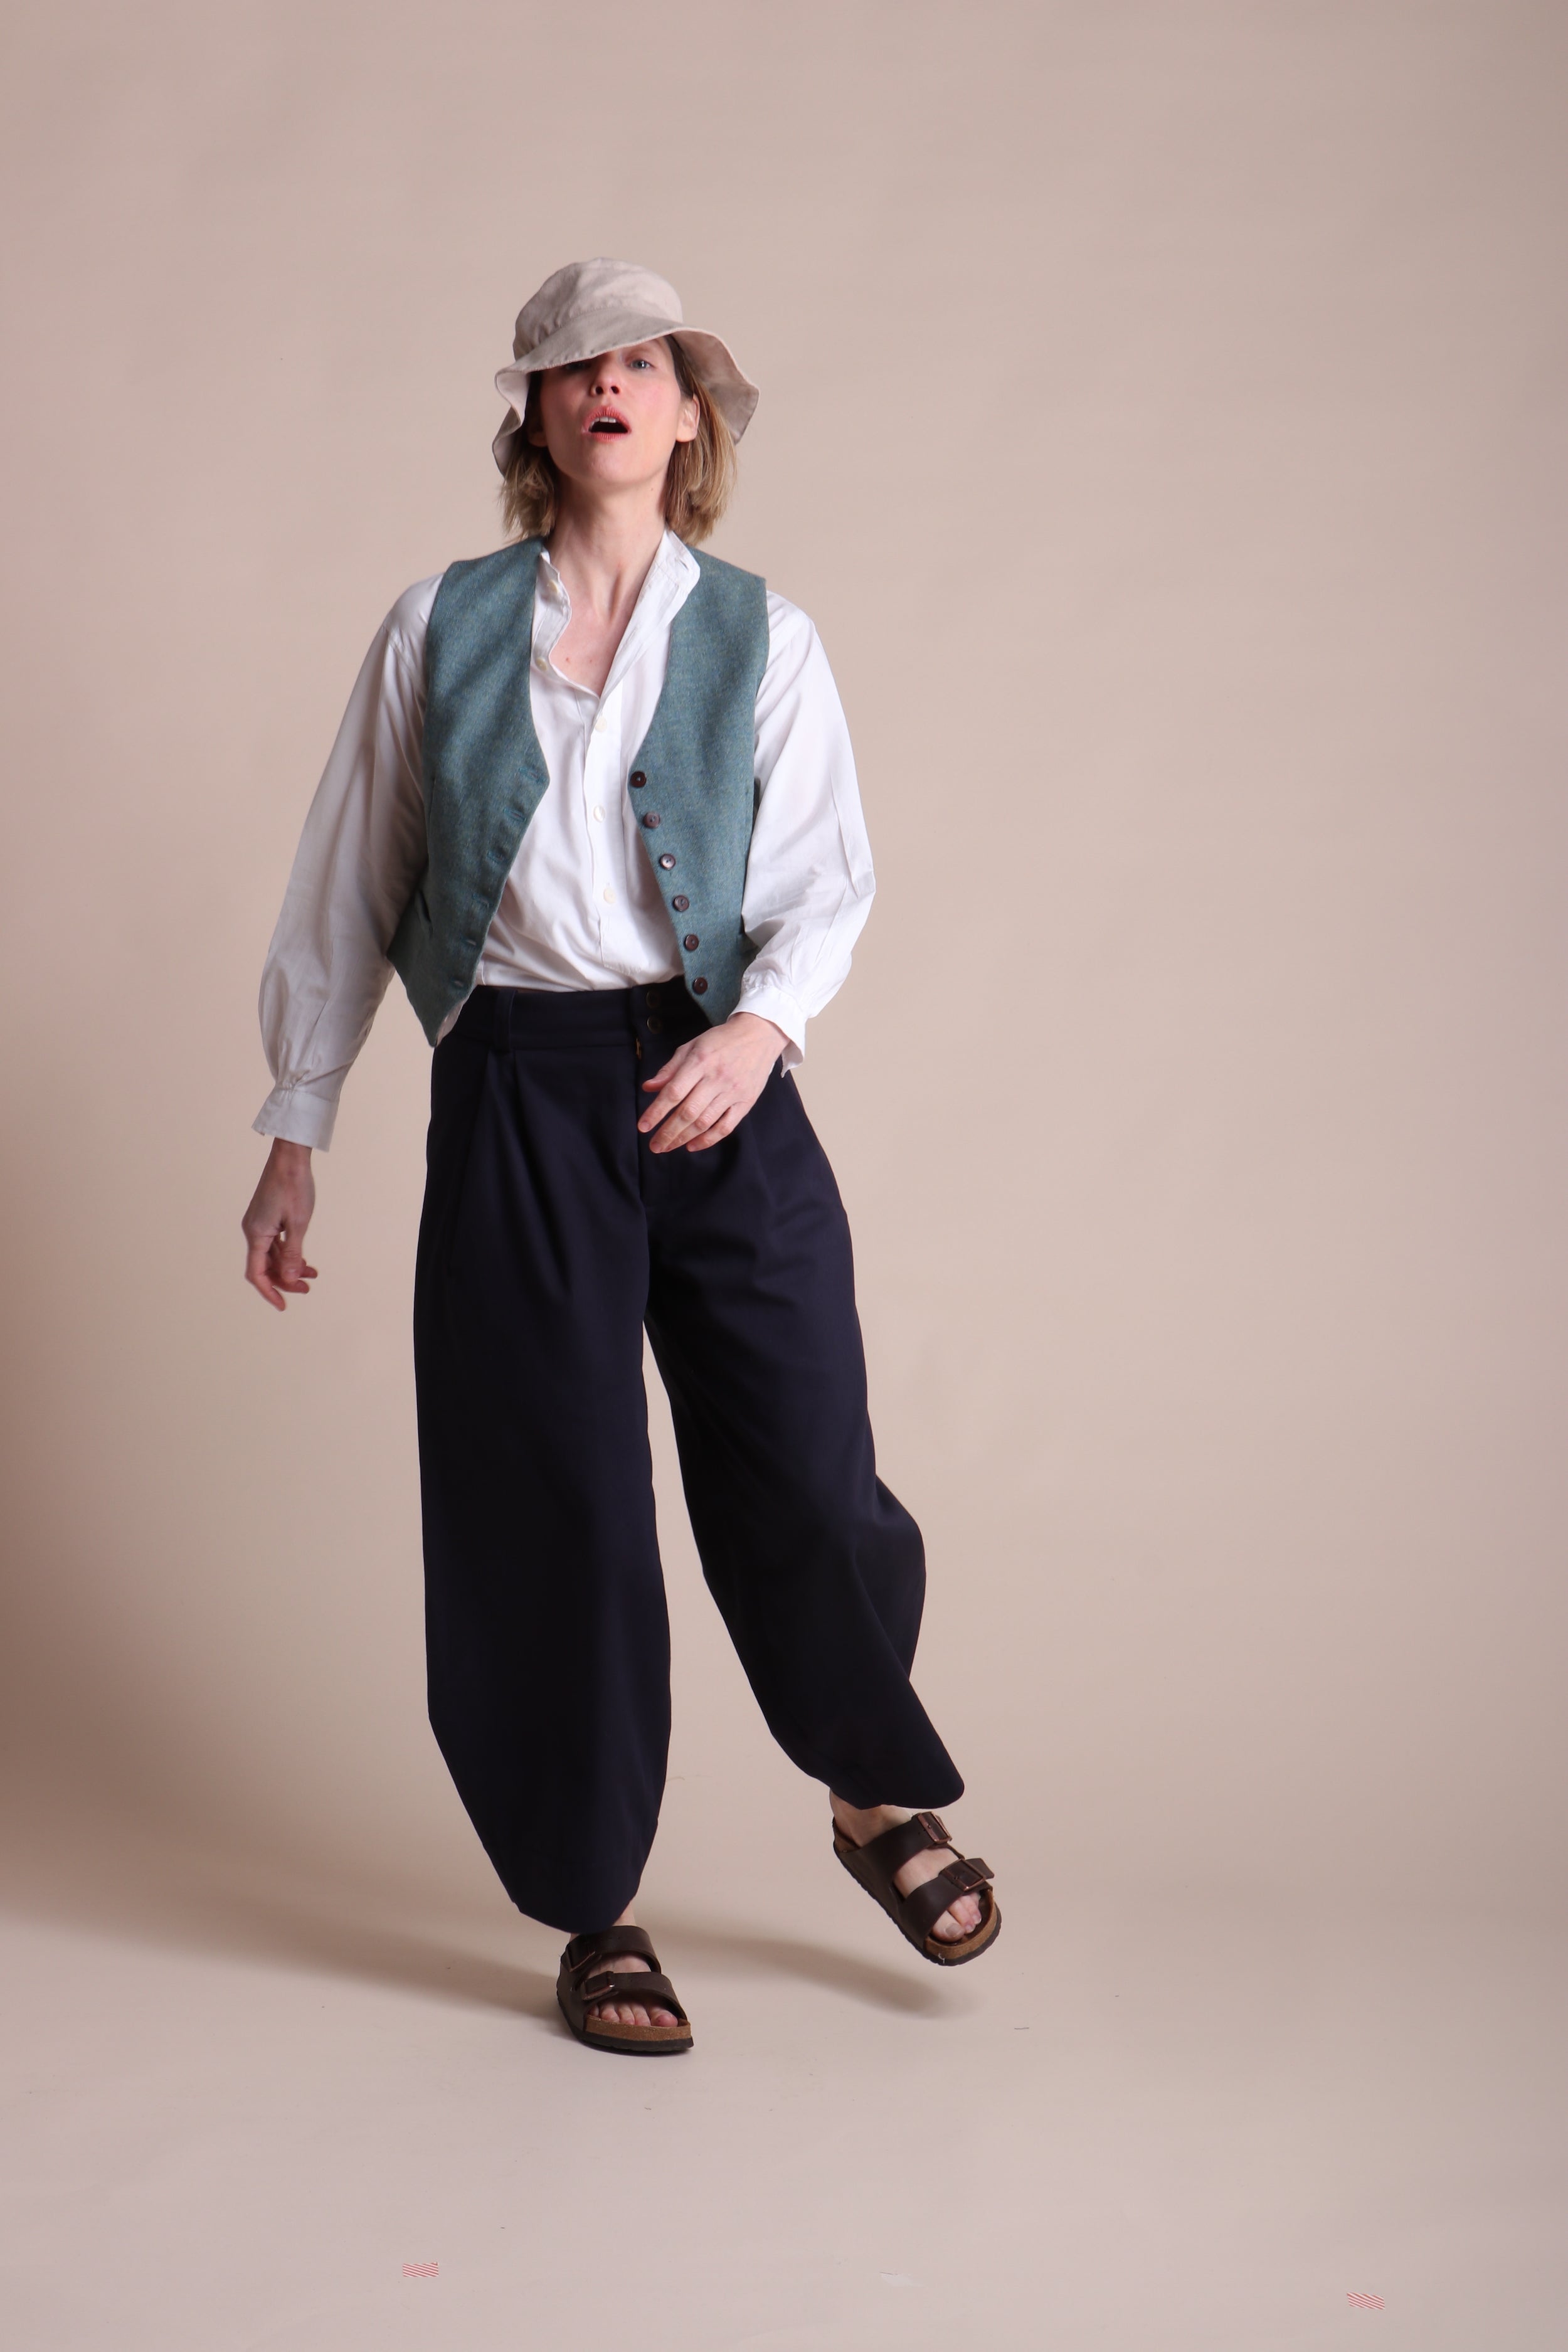 Woman wears Carrier Company Women's Wool Waistcoat in Marine with Lightweight Collarless Shirt and Dutch Trouser in Navy Cotton Drill